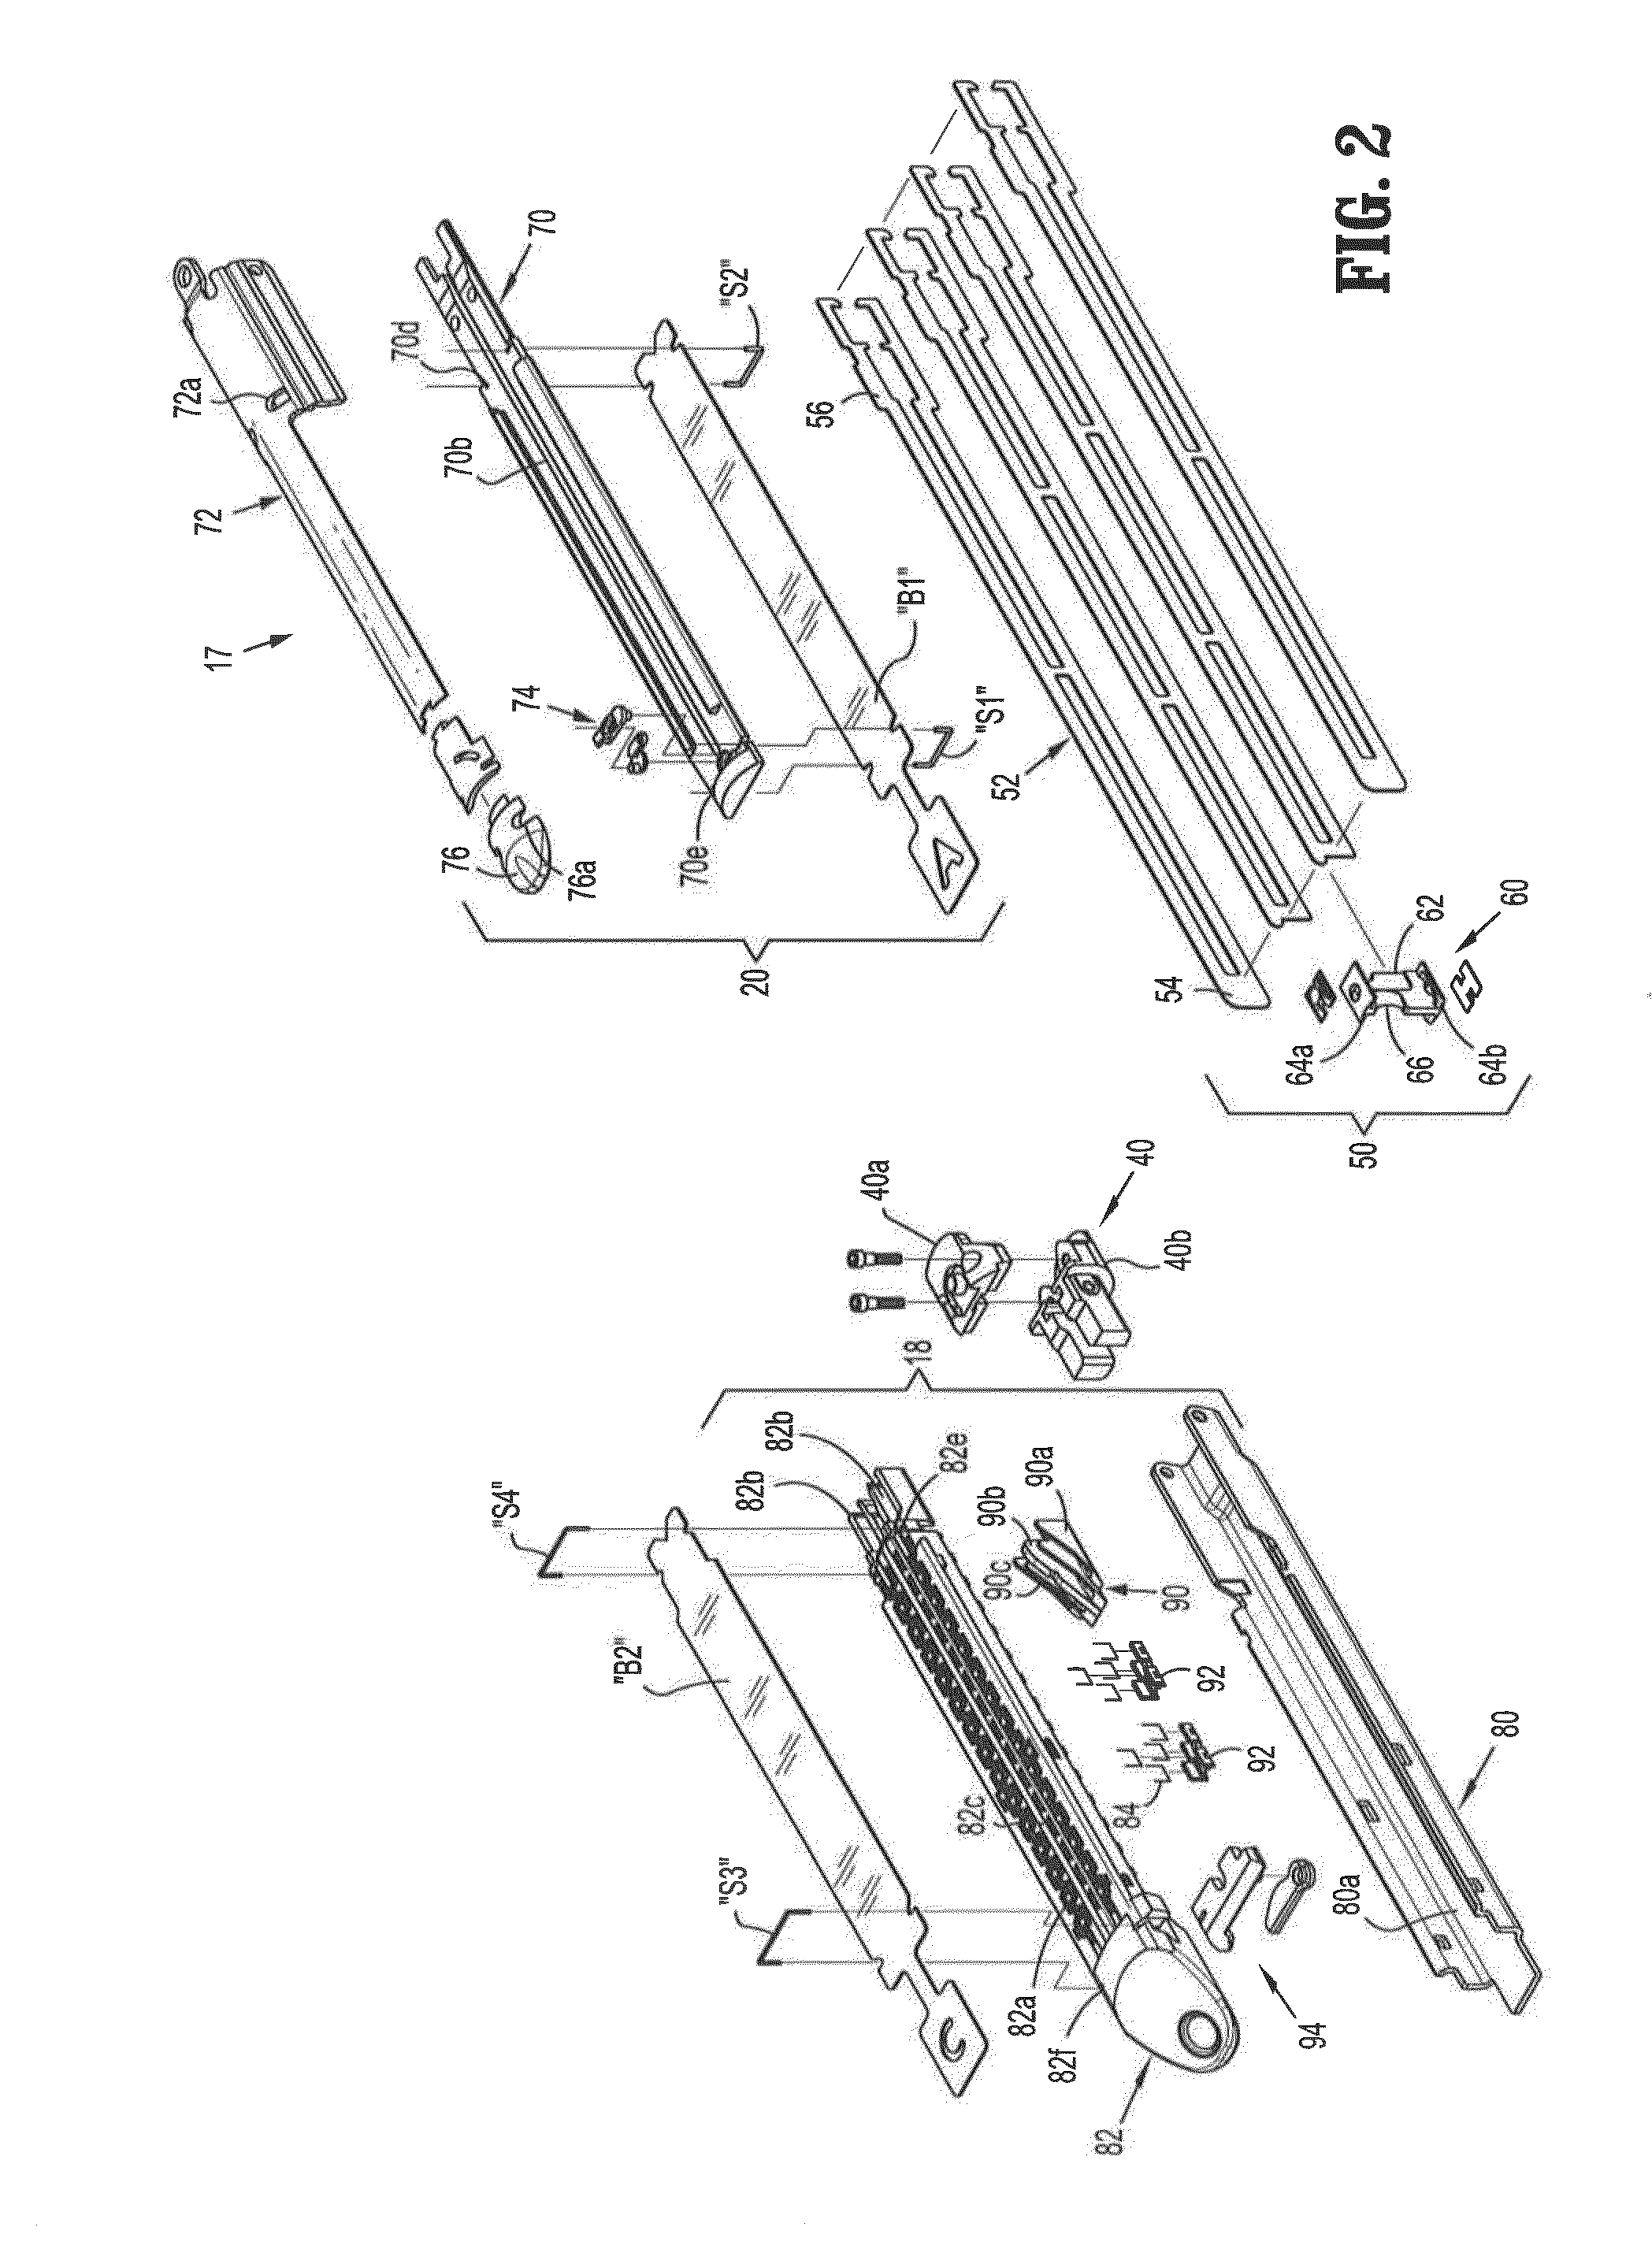 Adherence concepts for non-woven absorbable felt buttresses